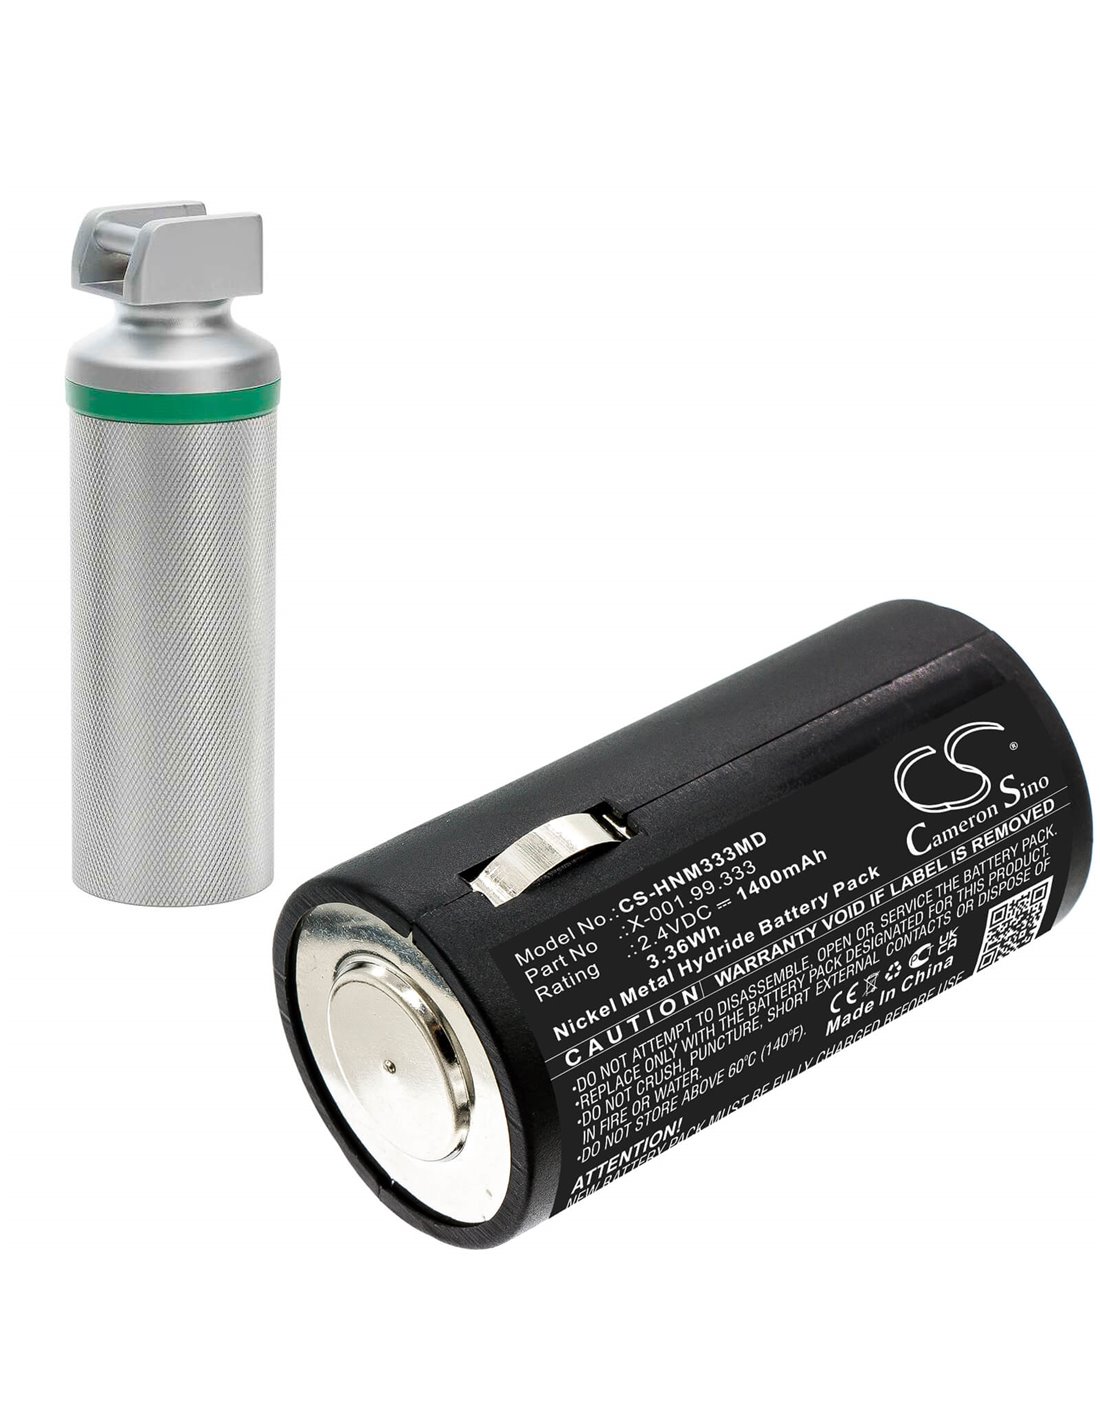 2.4V, 1400mAh, Ni-MH Battery fits Heine, Old S2z Handles, 3.36Wh